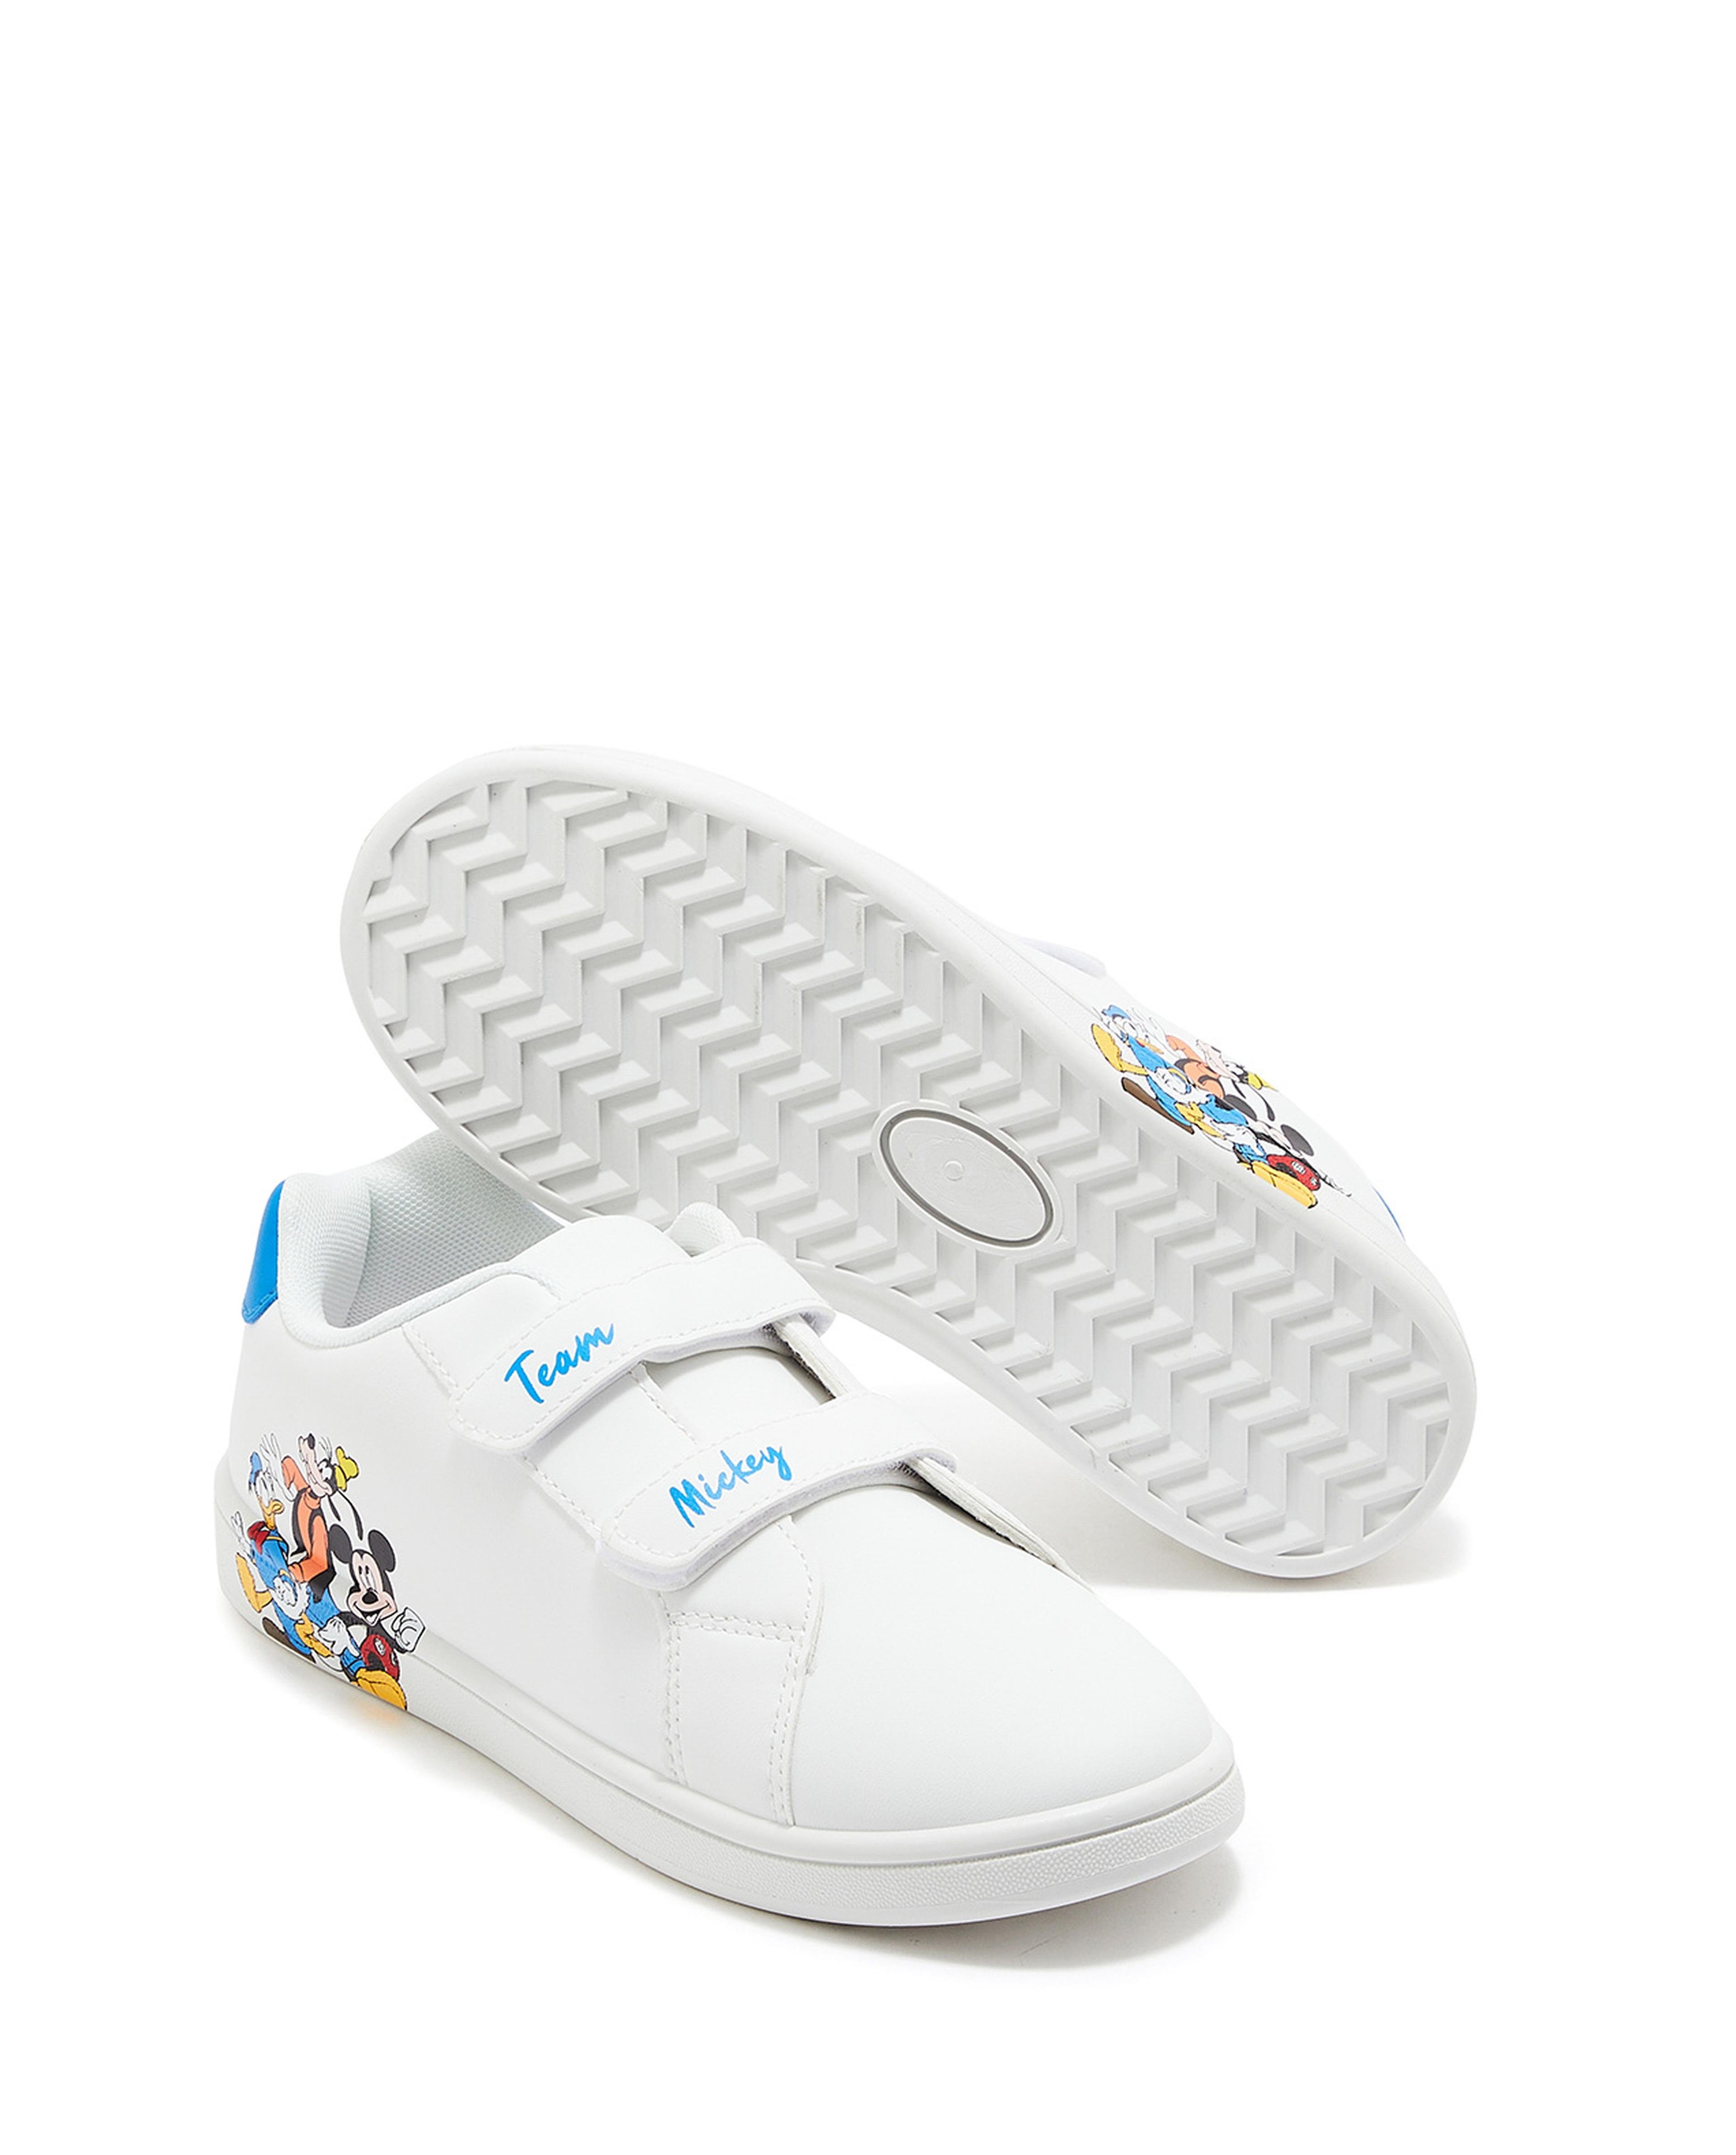 Mickey & Friends Print Velcro Shoes